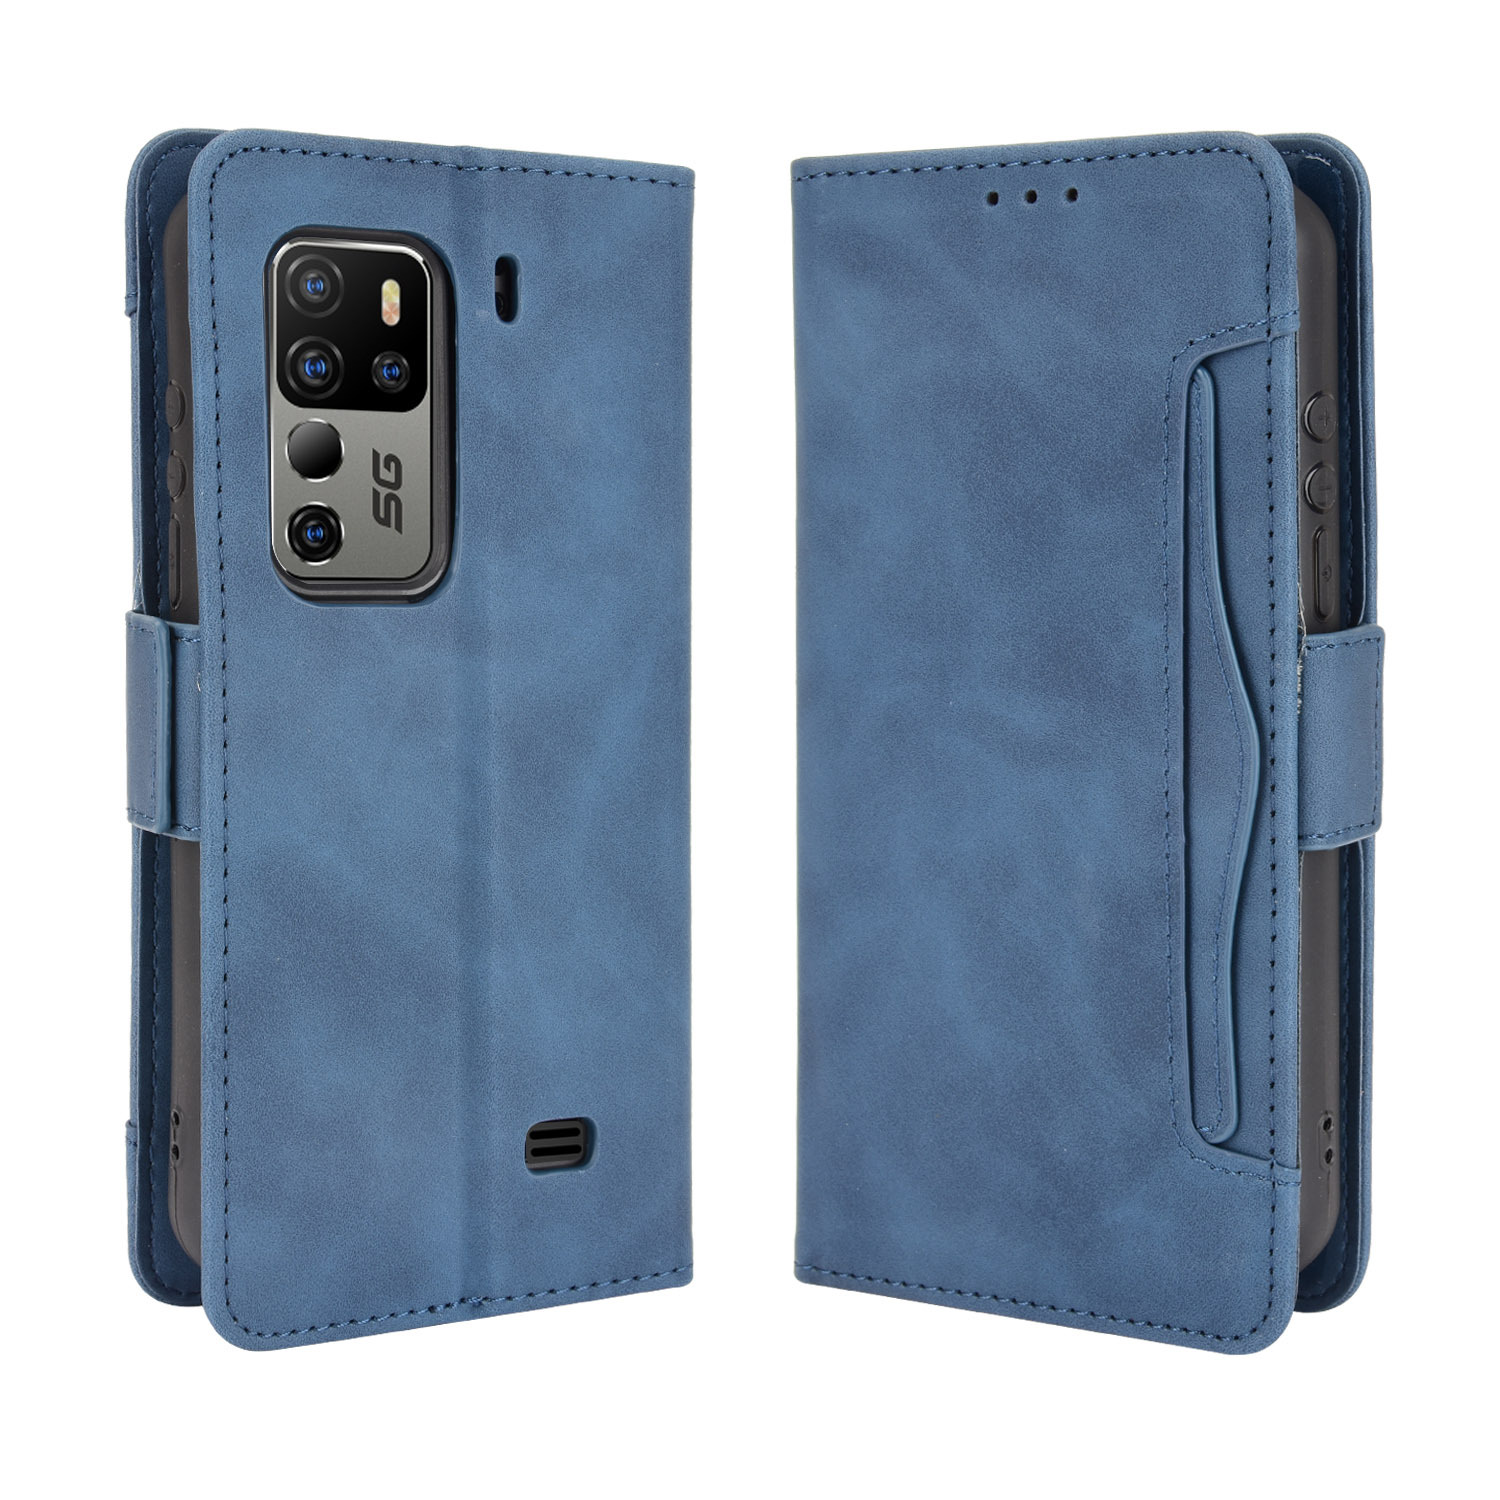 Bakeey-for-Ulefone-Armor-11-5G-Armor-11T-5G-Case-Magnetic-Flip-with-Multiple-Card-Slot-Wallet-Foldin-1915540-8